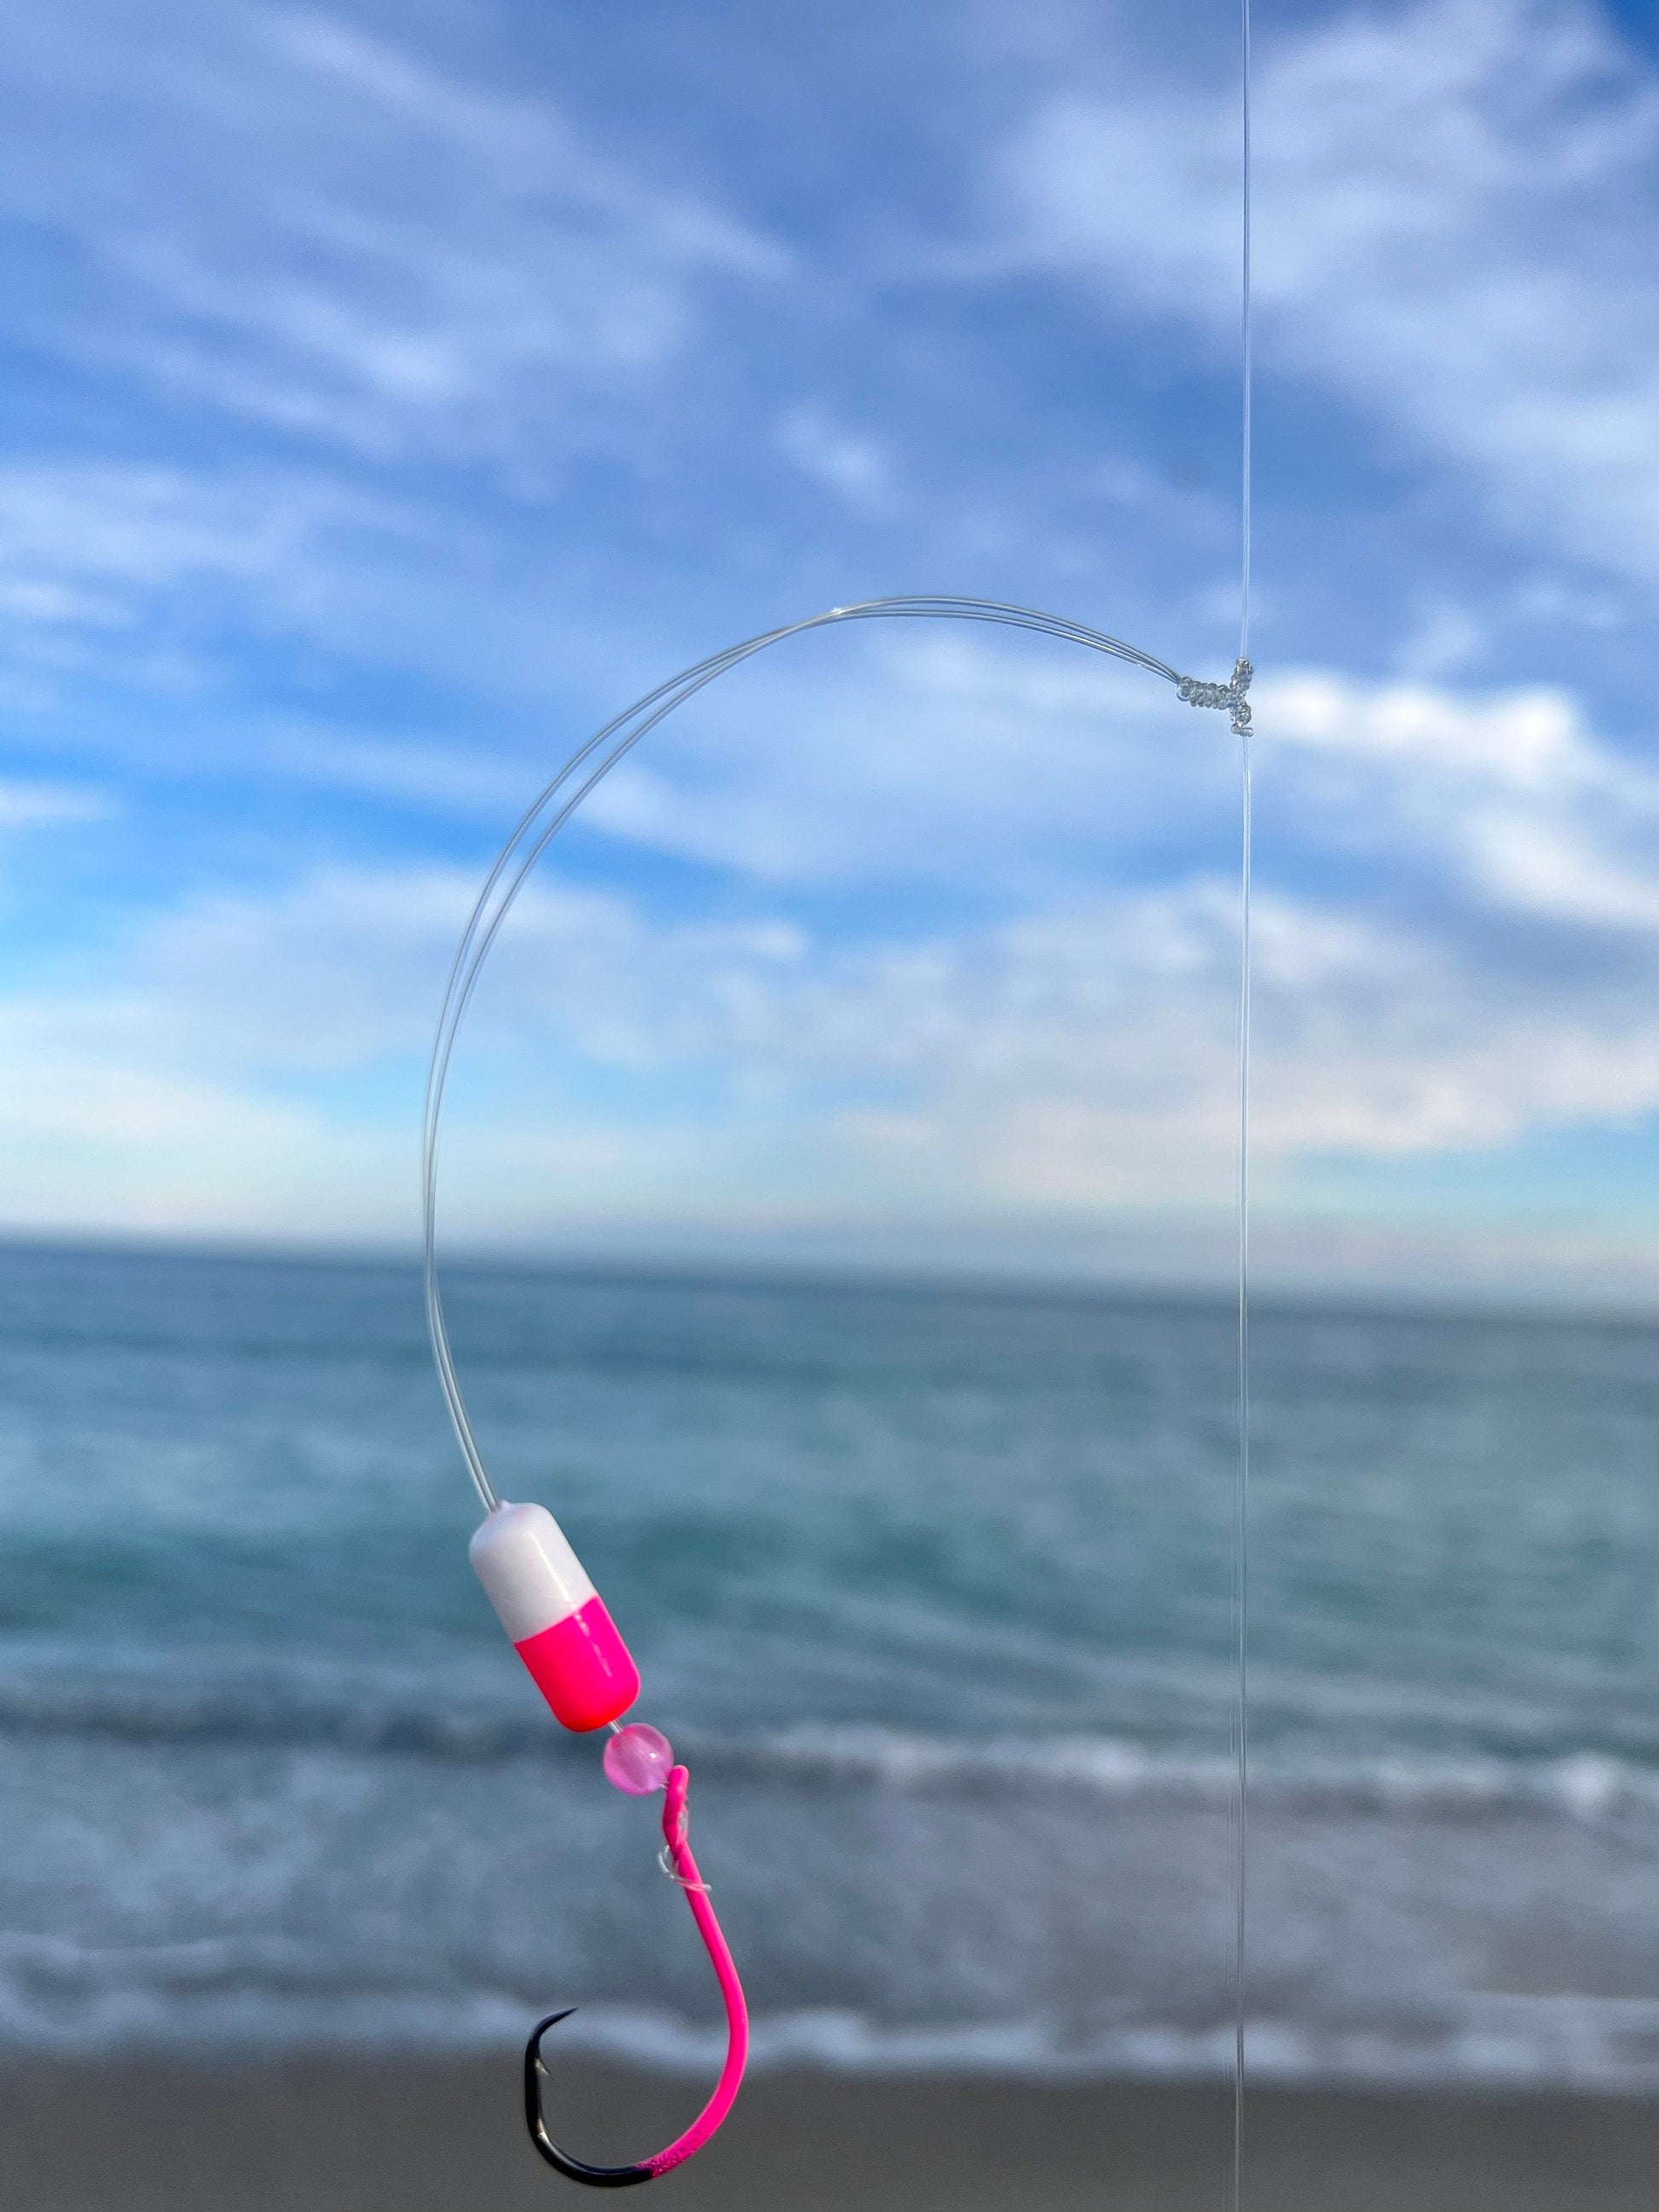 Single Pack 1 Pompano Rig by Tide Titan Saltwater Fishing Tackle Hi-low Rig Circle  Hooks Khale Hooks for Surf, Inshore, Offshore 